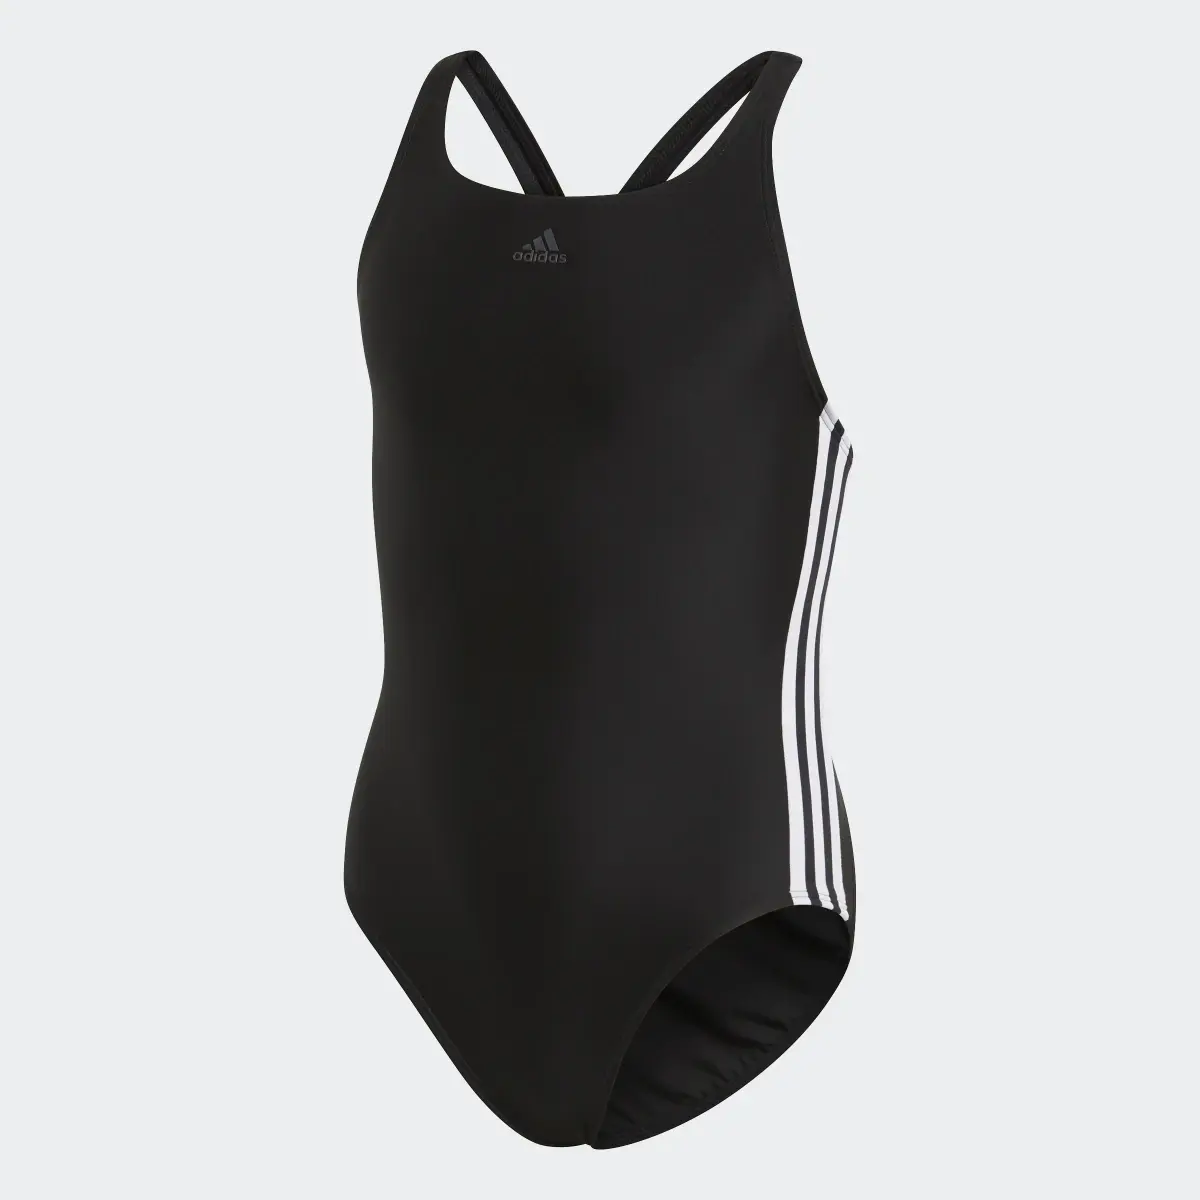 Adidas Athly V 3-Stripes Swimsuit. 1